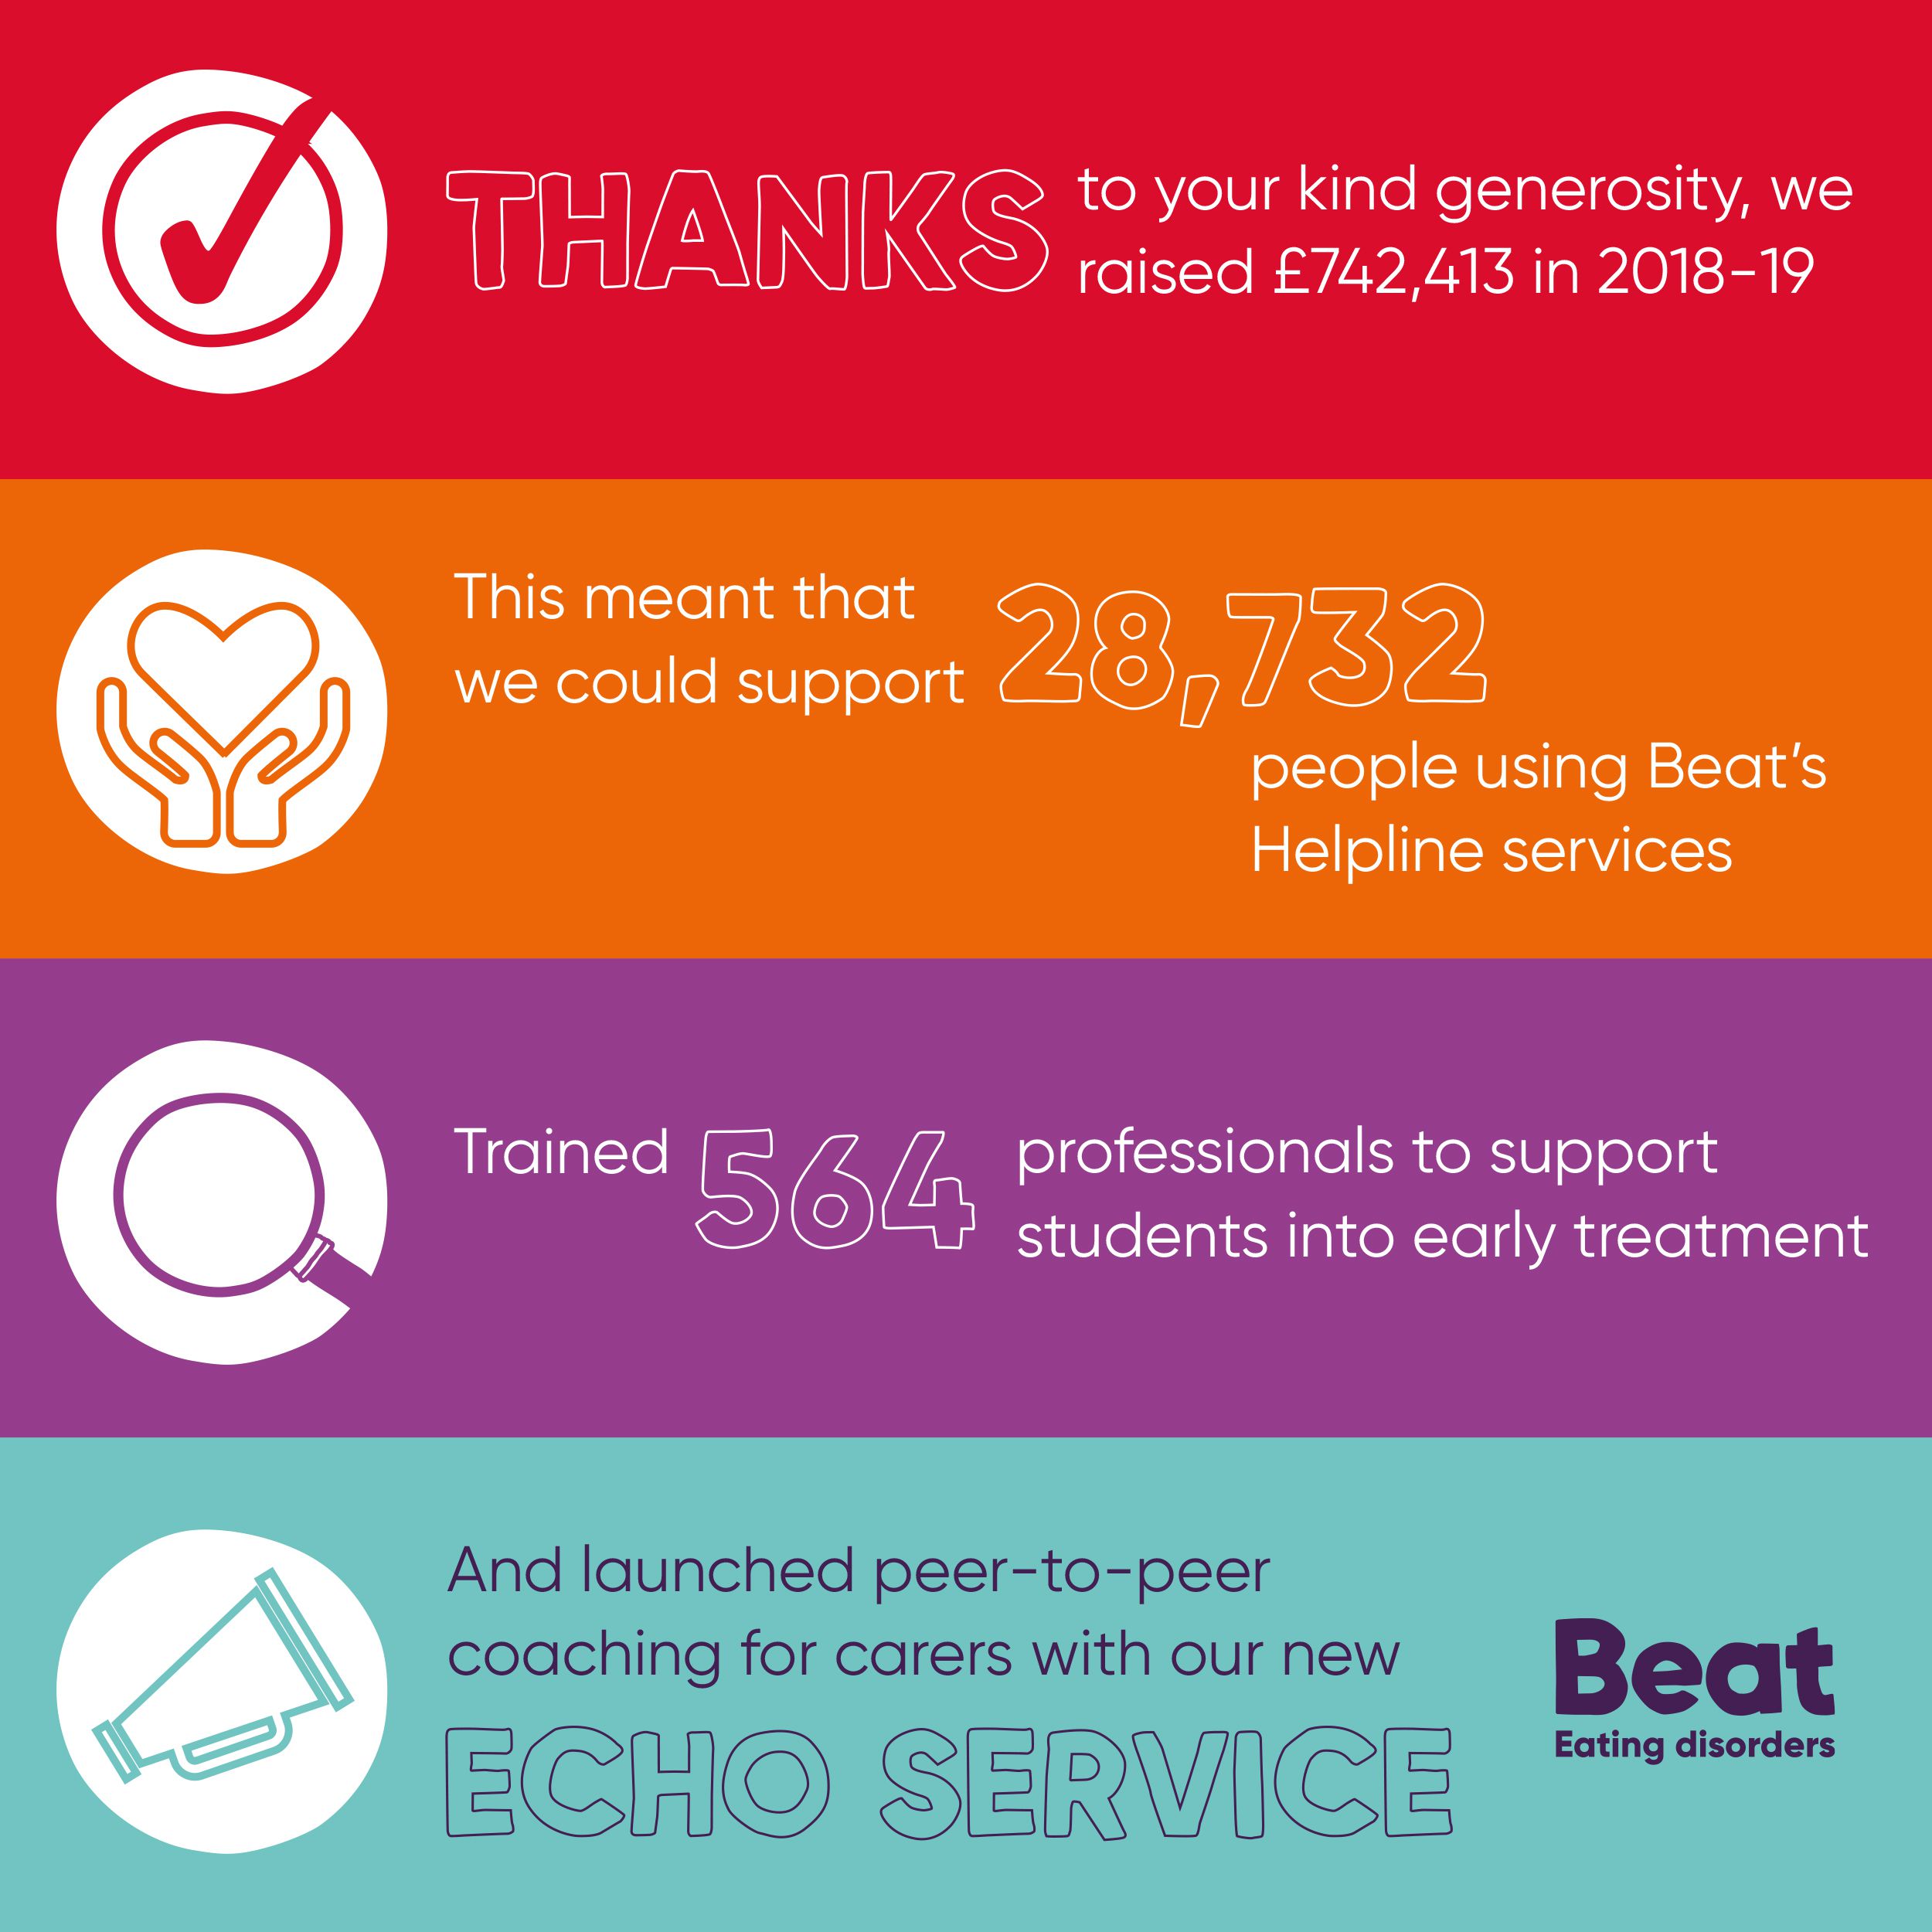 Beat thanks supporters £742,413 -